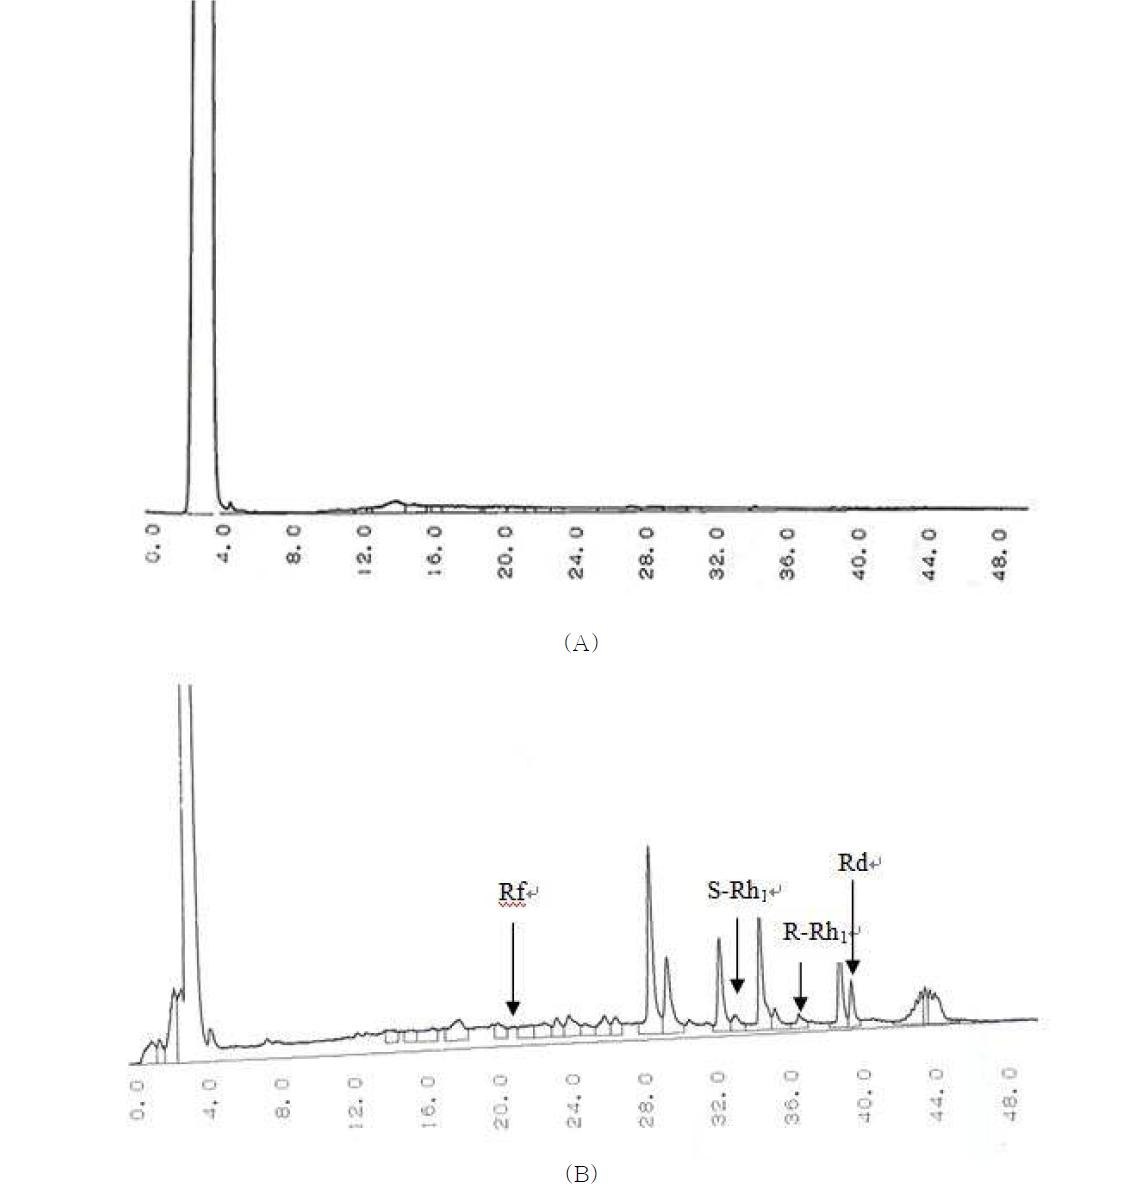 HPLC chromatograms of (A) control and (B) ginsenoside Rf, S-Rh1, R-Rh1 and Rd in goat milk after 21 days onsupplement of cultured wild ginseng roots.